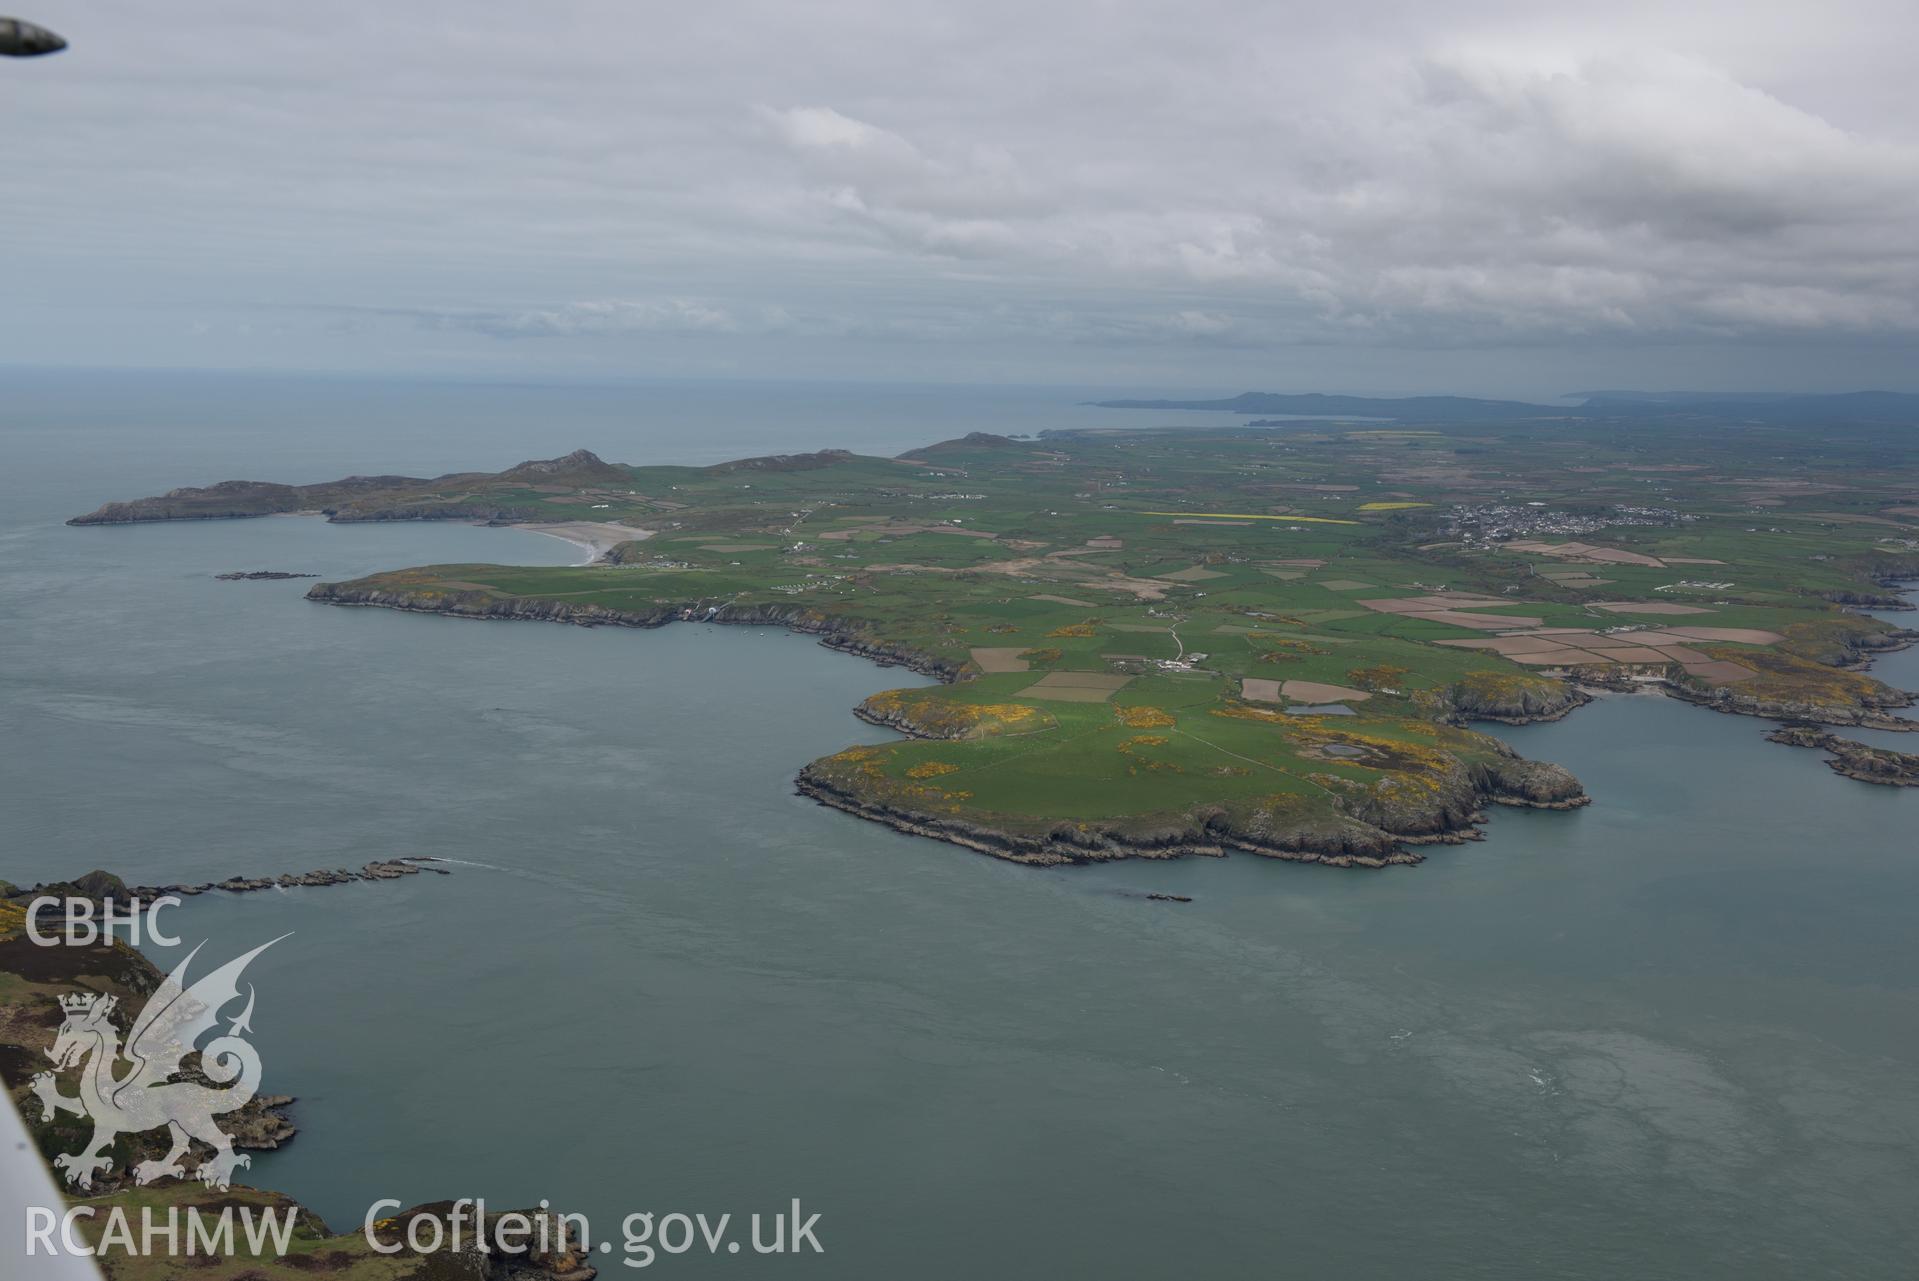 Ramsey island at extreme low tide. Baseline aerial reconnaissance survey for the CHERISH Project. ? Crown: CHERISH PROJECT 2017. Produced with EU funds through the Ireland Wales Co-operation Programme 2014-2020. All material made freely available through the Open Government Licence.